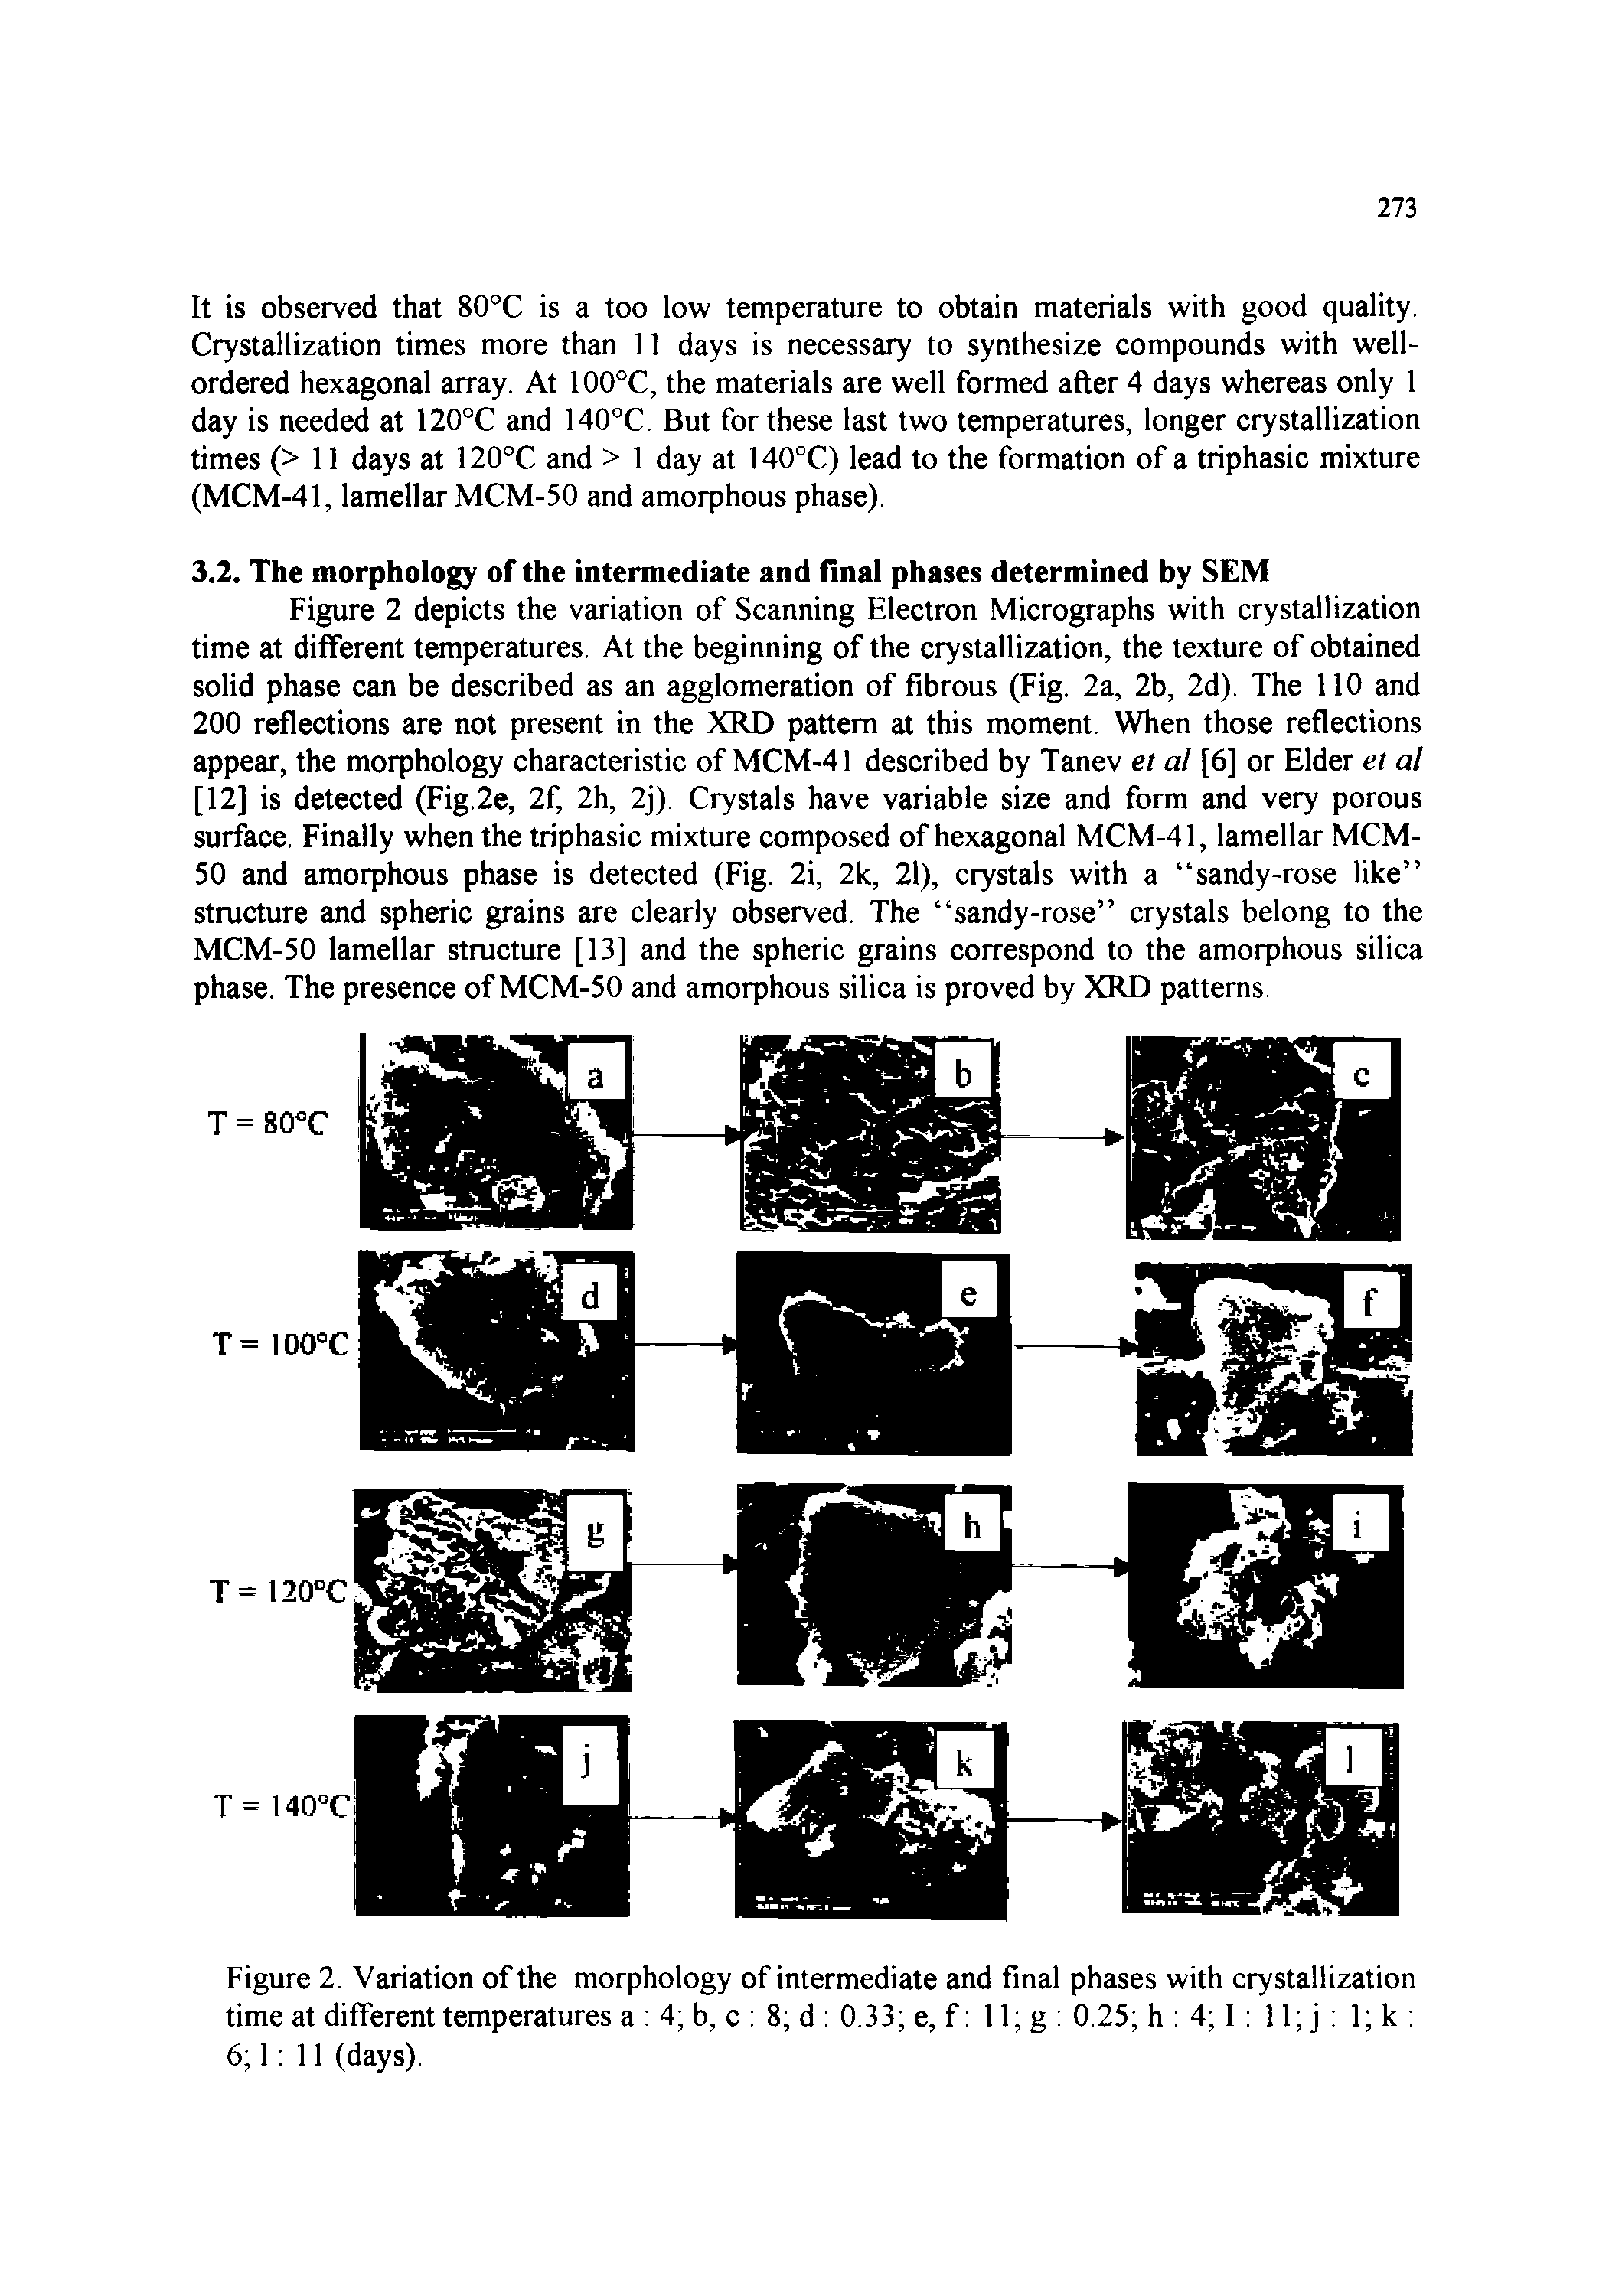 Figure 2 depicts the variation of Scanning Electron Micrographs with crystallization time at different temperatures. At the beginning of the crystallization, the texture of obtained solid phase can be described as an agglomeration of fibrous (Fig. 2a, 2b, 2d). The 110 and 200 reflections are not present in the XRD pattern at this moment. When those reflections appear, the morphology characteristic of MCM-41 described by Tanev et al [6] or Elder et al [12] is detected (Fig,2e, 2f, 2h, 2j). Crystals have variable size and form and very porous surface. Finally when the triphasic mixture composed of hexagonal MCM-41, lamellar MCM-50 and amorphous phase is detected (Fig. 2i, 2k, 21), crystals with a sandy-rose like structure and spheric grains are clearly observed. The sandy-rose crystals belong to the MCM-50 lamellar structure [13] and the spheric grains correspond to the amorphous silica phase. The presence of MCM-50 and amorphous silica is proved by XRD patterns.